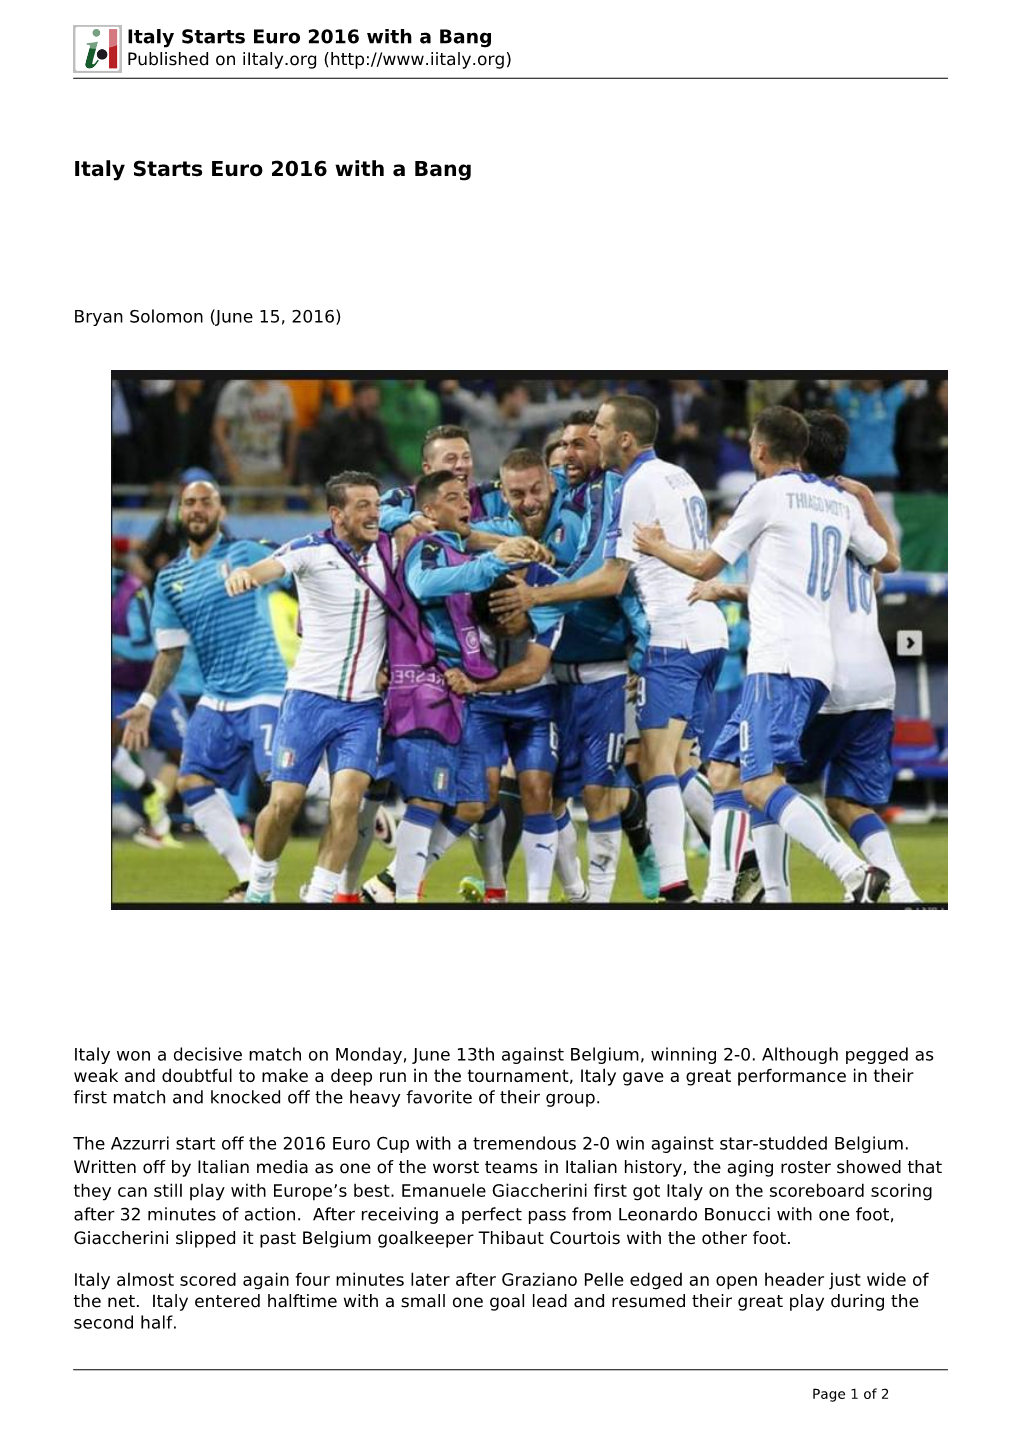 Italy Starts Euro 2016 with a Bang Published on Iitaly.Org (